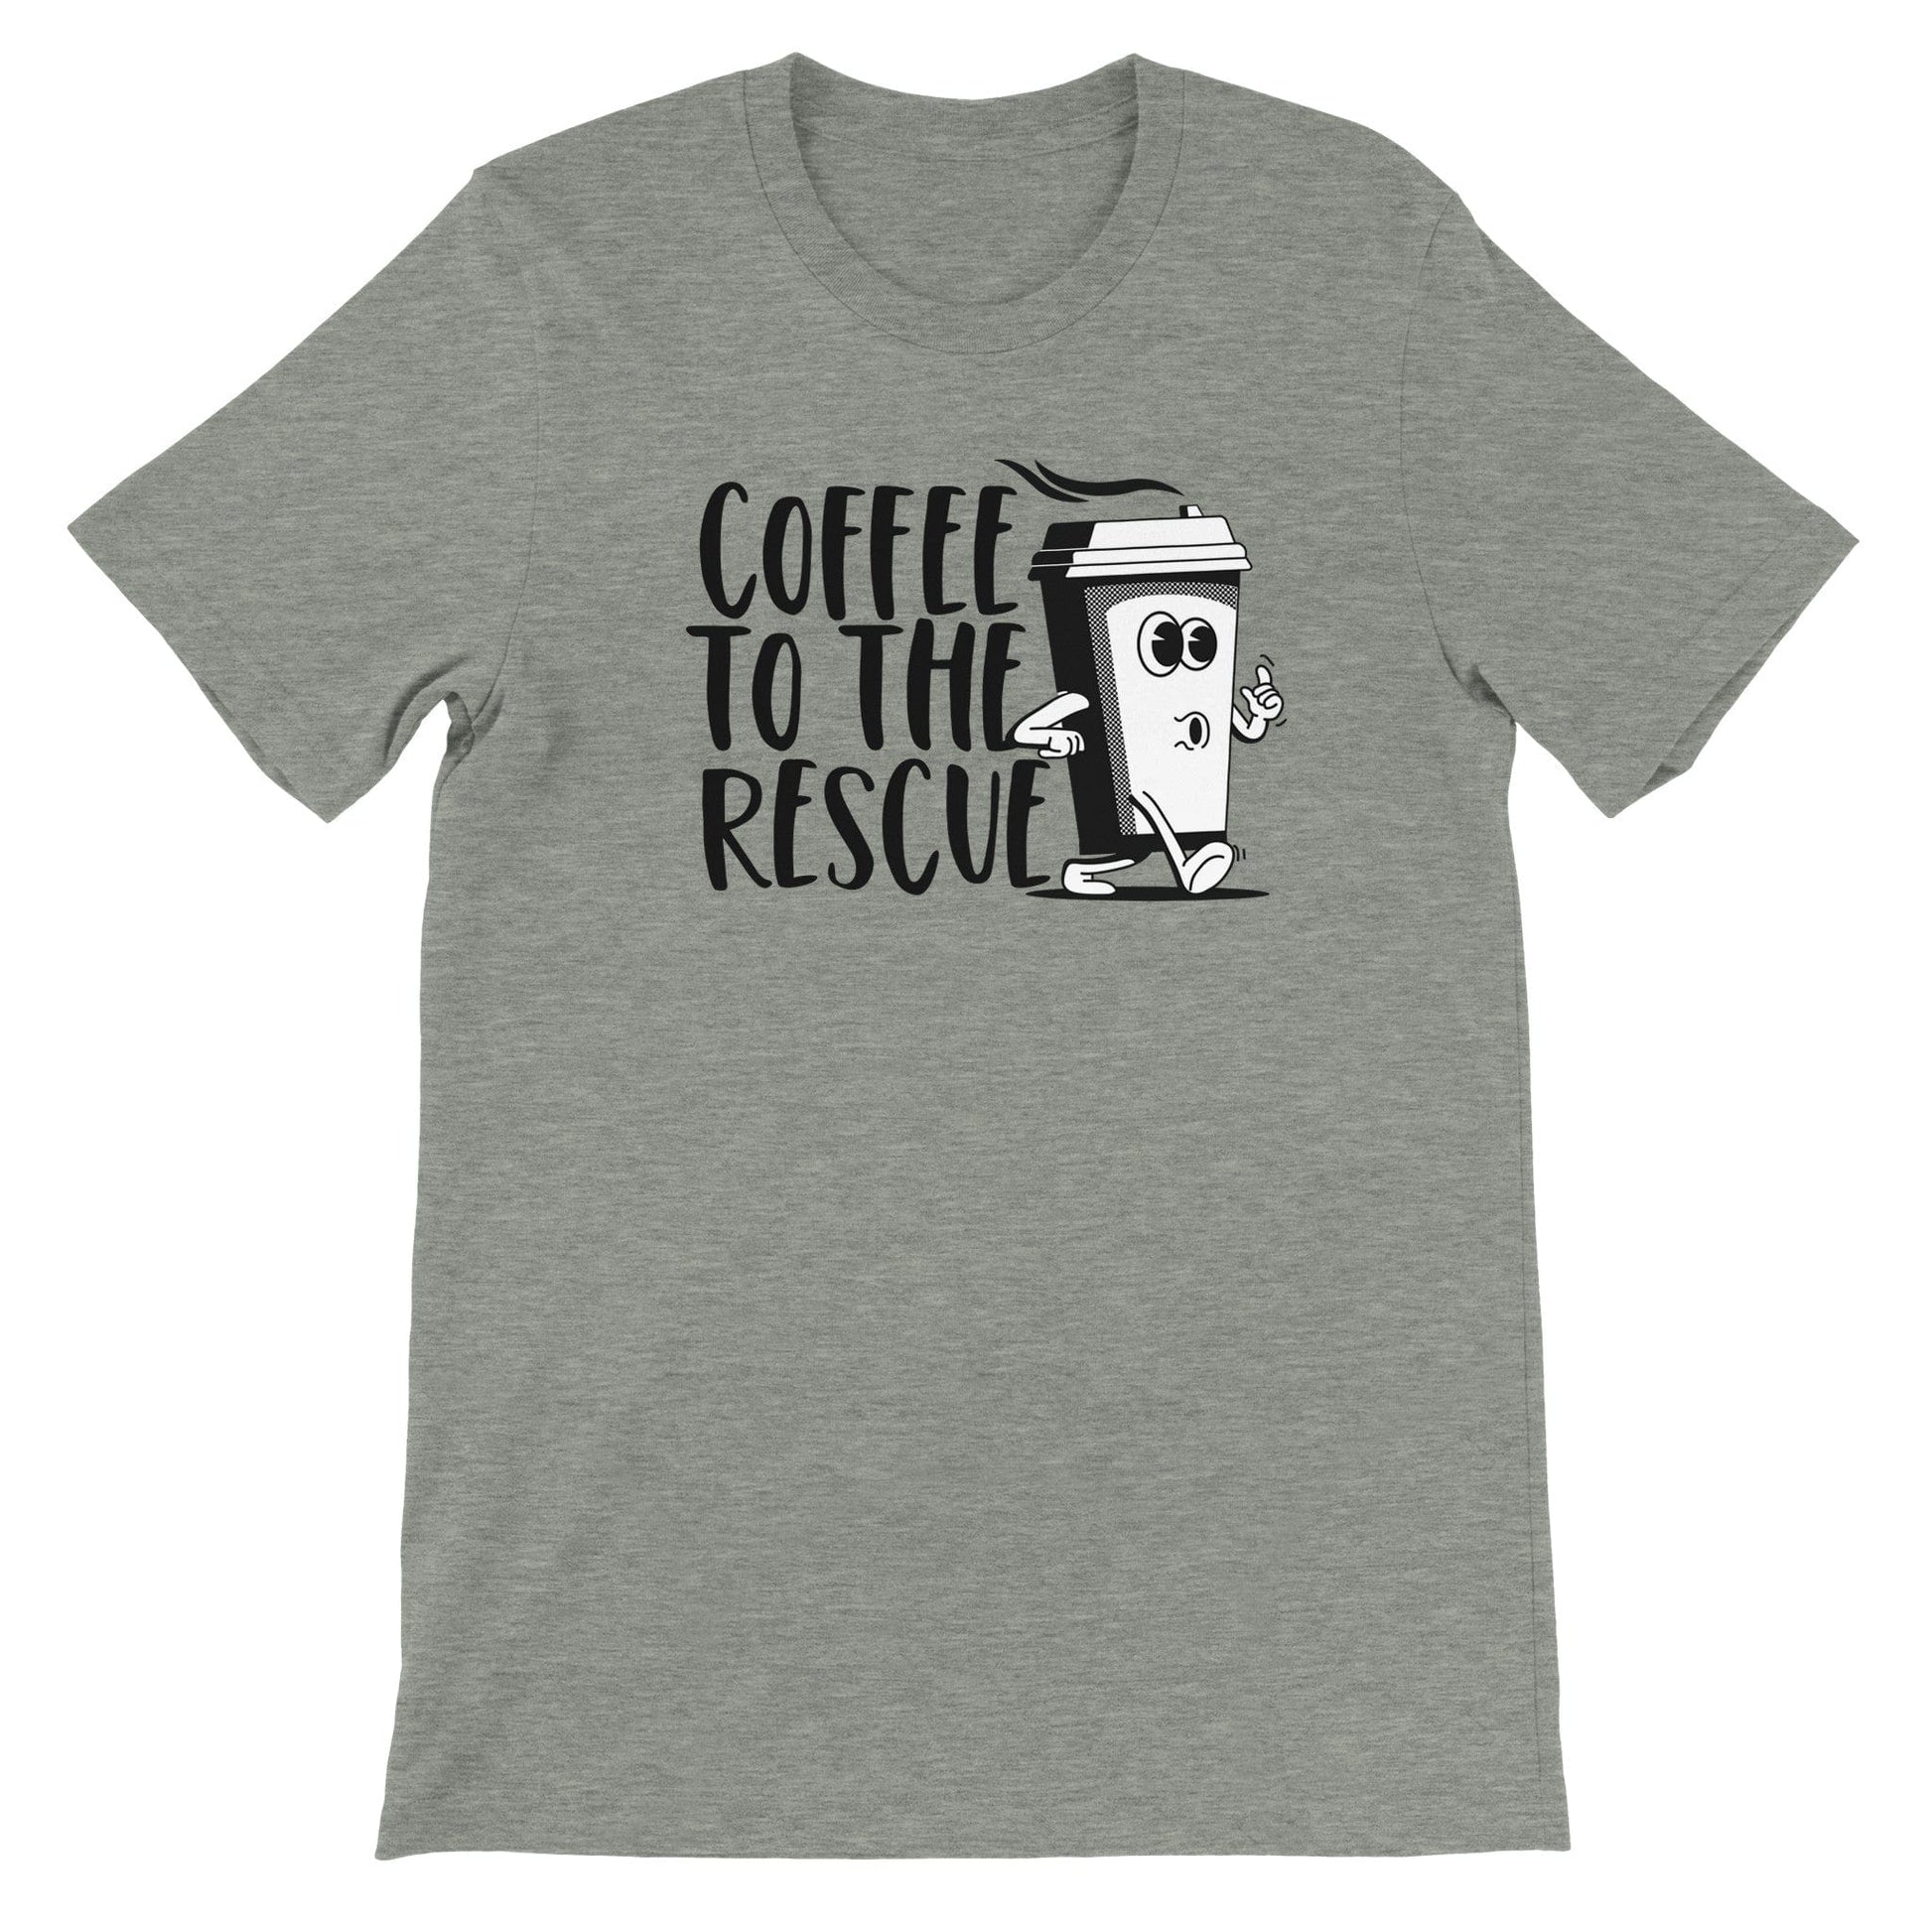 Good Bean Gifts Coffee To The Rescue - ALT design Unisex Crewneck T-shirt Athletic Heather / S